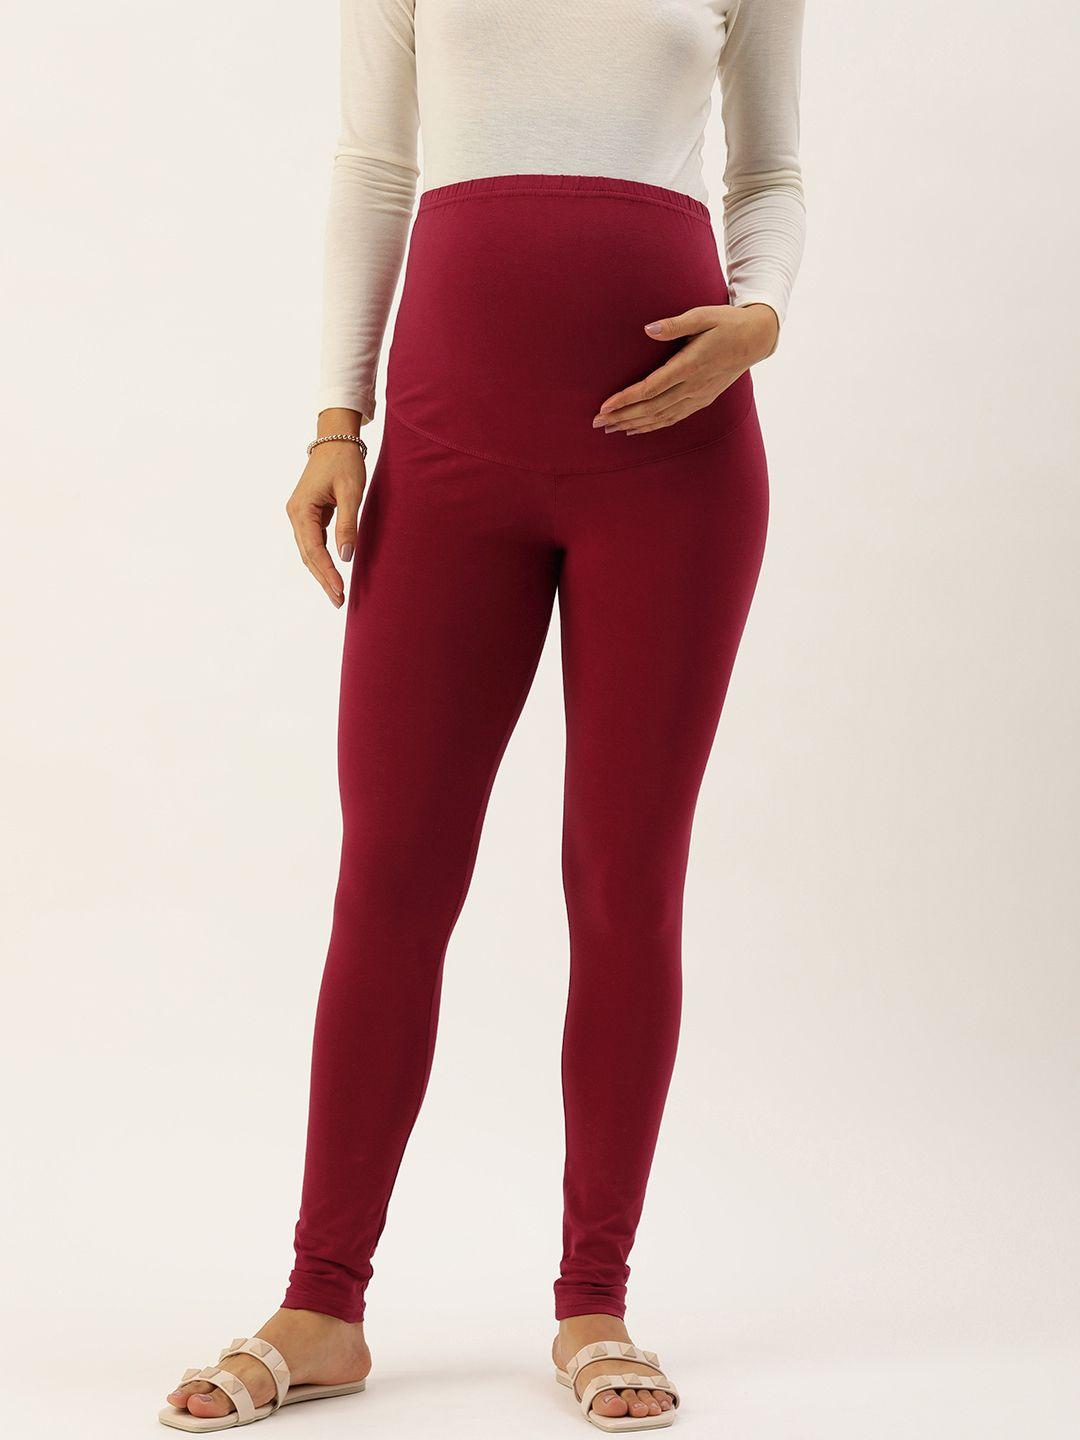 blush-9-maternity-over-the-bump-solid-maternity-leggings